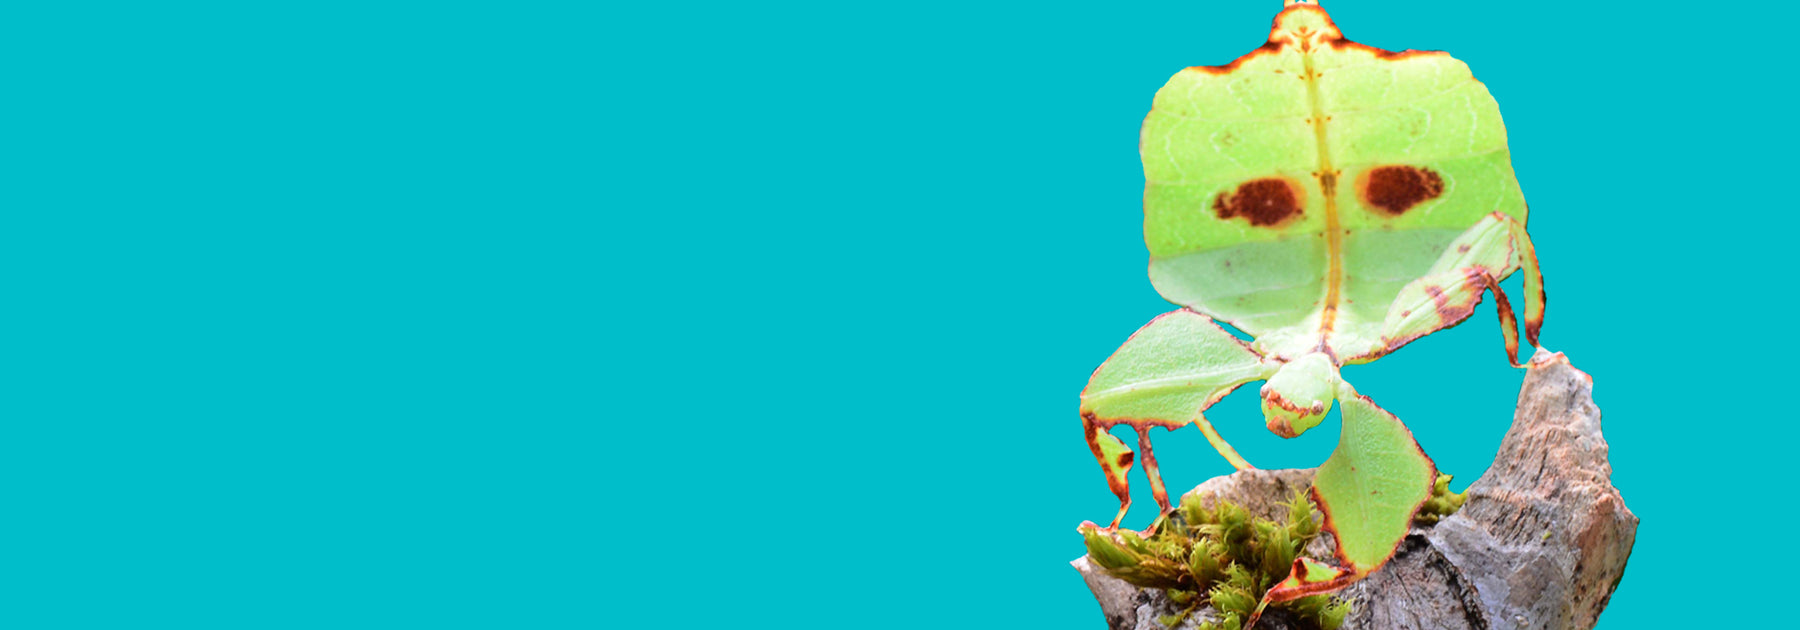 Large image of a leaf insect perched on a log or stump in front of a bright blue background